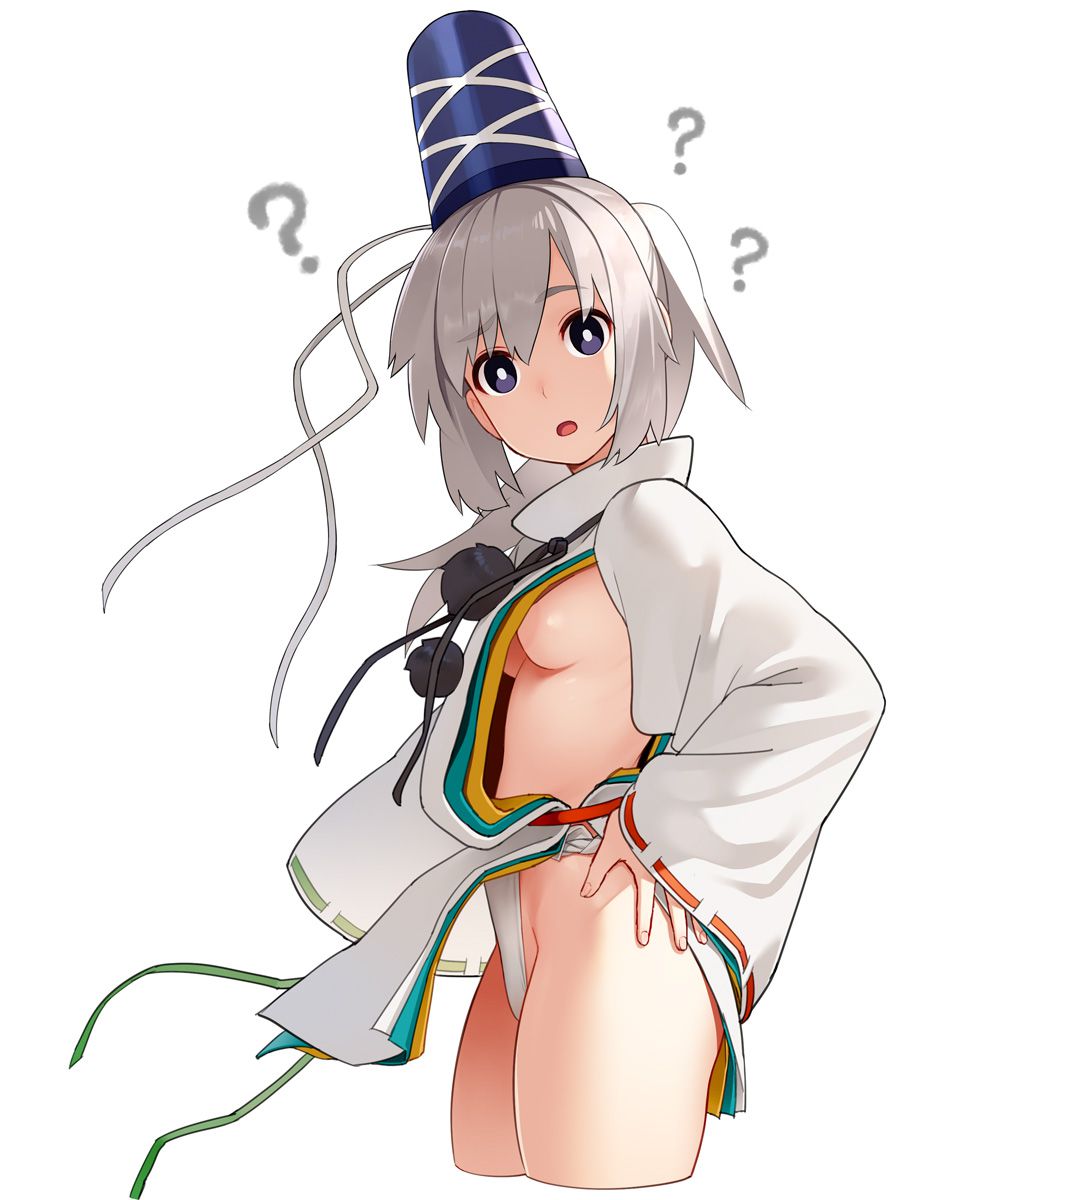 [Touhou] Secondary erotic images of female characters 3 70 photos 17